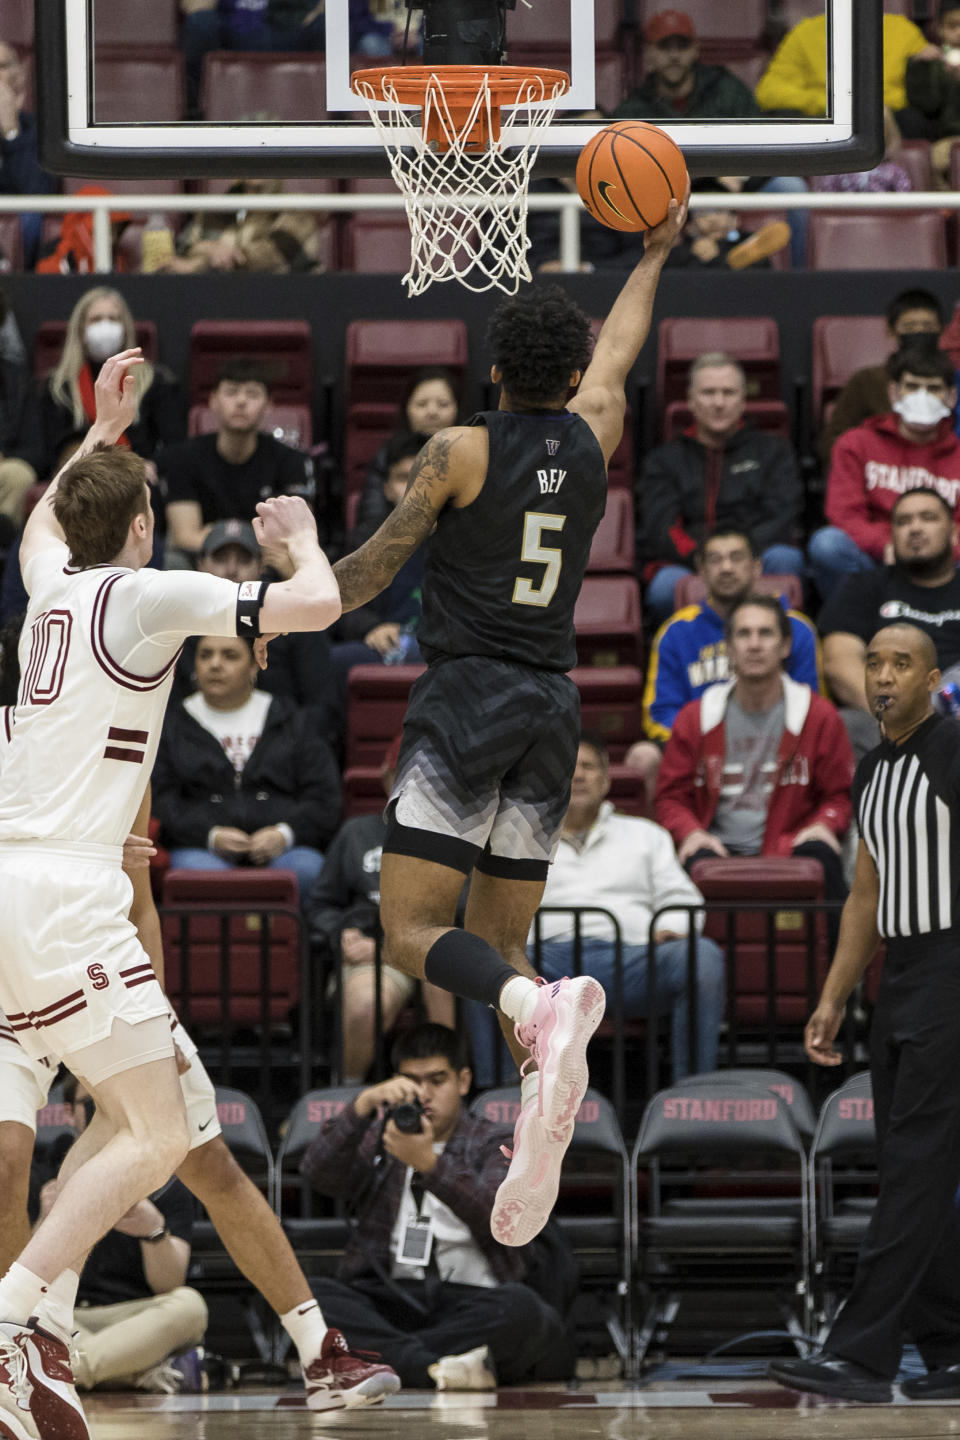 Washington guard Jamal Bey (5) shoots besides Stanford forward Max Murrell, left, during the first half of an NCAA college basketball game in Stanford, Calif., Sunday, Feb. 26, 2023. (AP Photo/John Hefti)